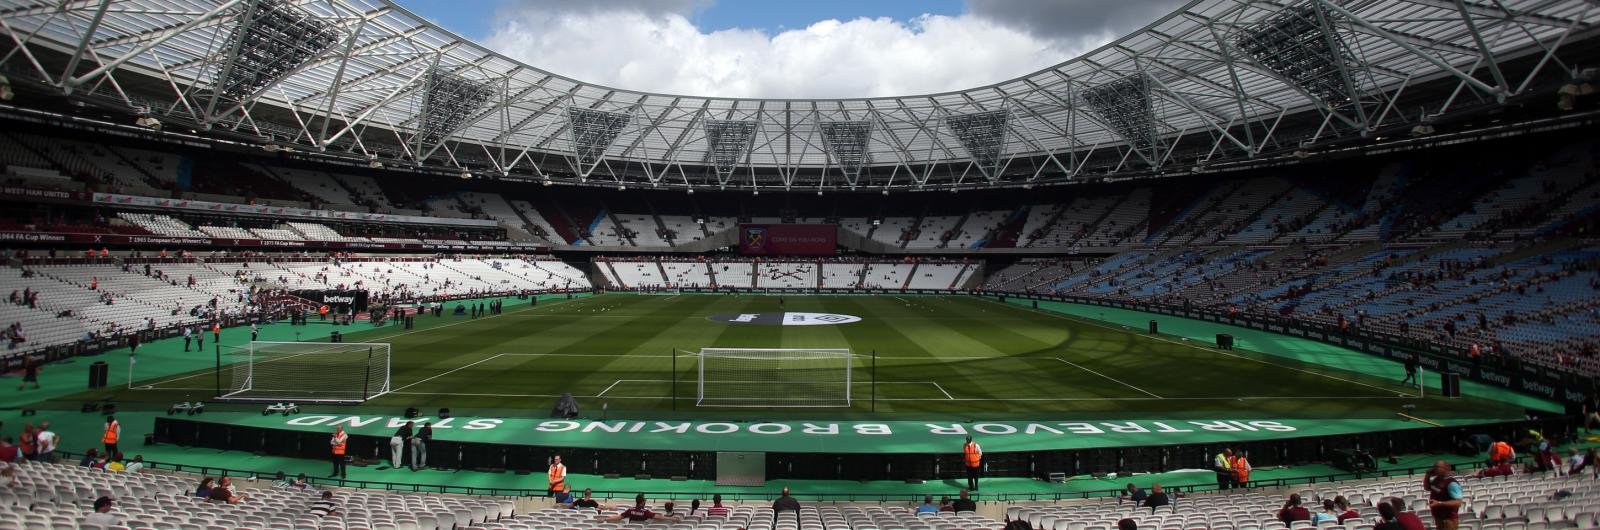 Children crying, shocking security and a toxic atmosphere – Welcome to West Ham’s London Stadium